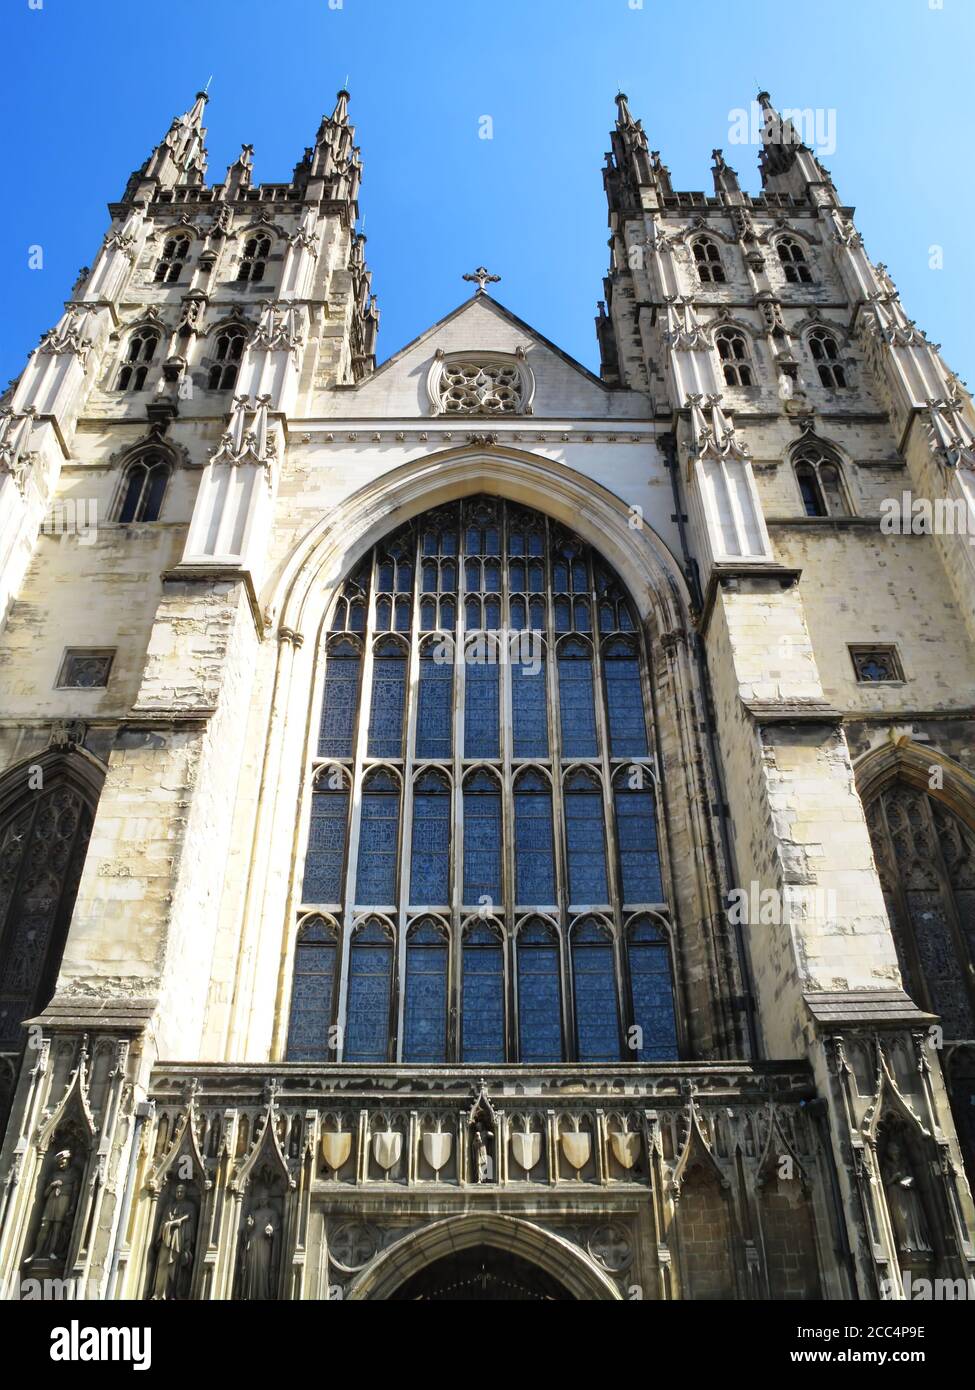 Canterbury Cathedral  Kent England UK founded by St Augustine in AD602 which is a popular tourism travel destination visitor landmark of the city stoc Stock Photo